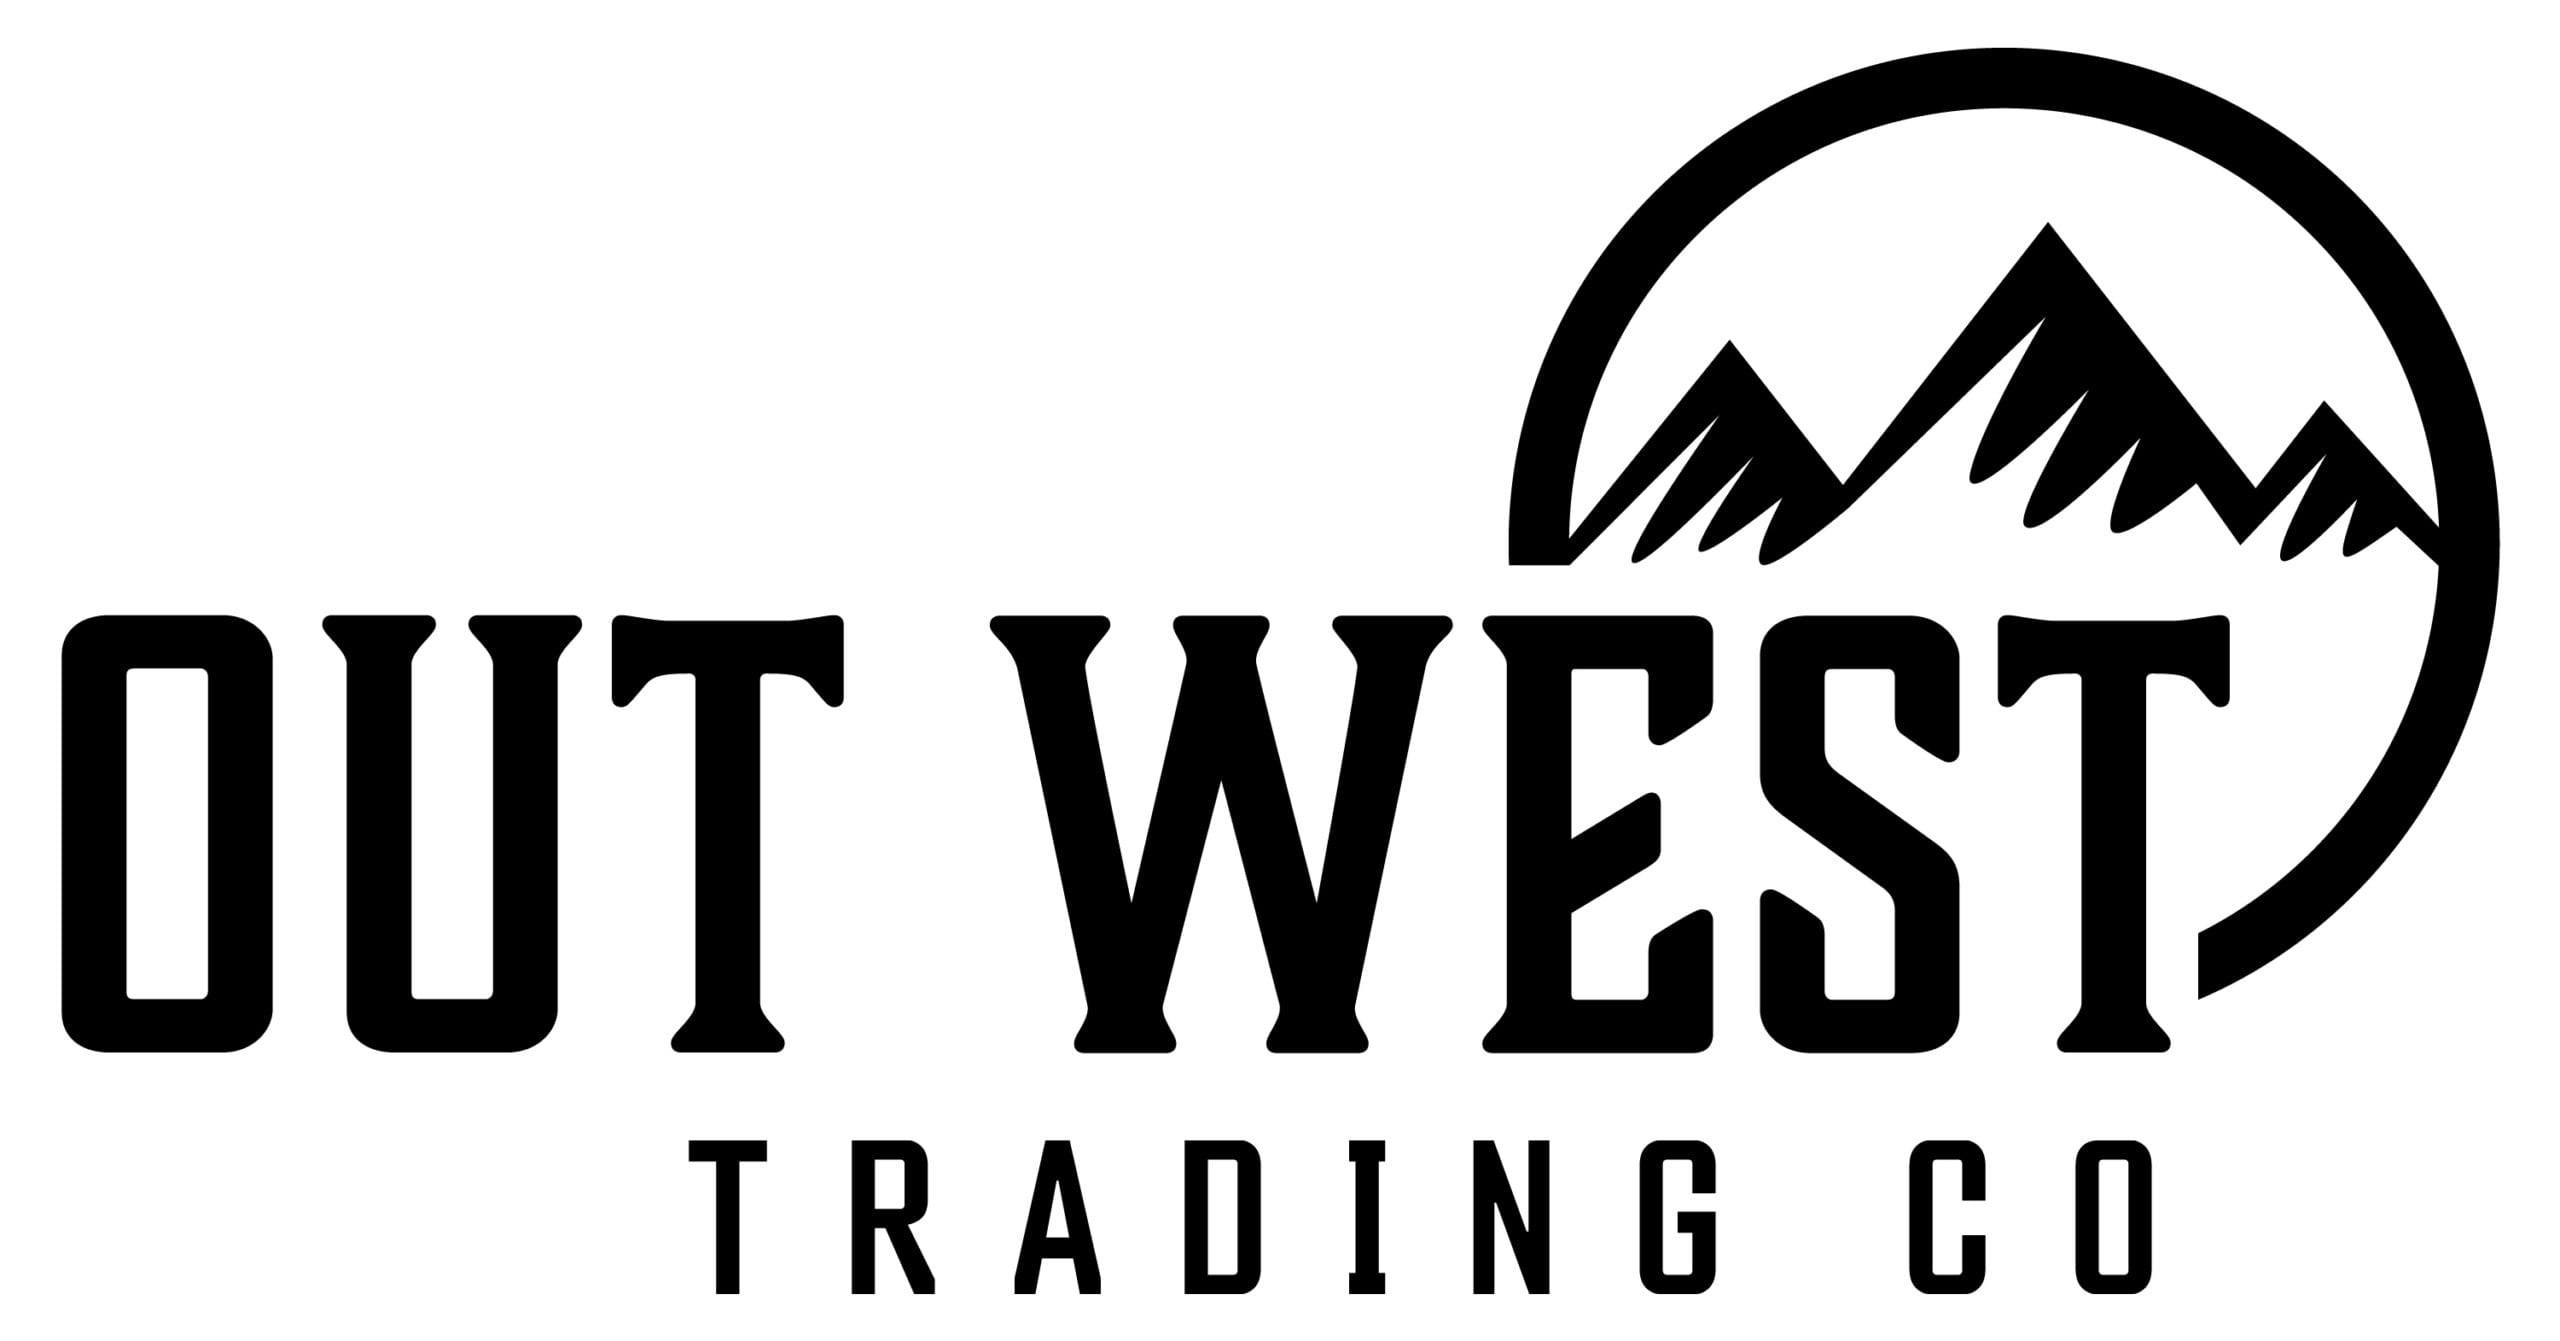 Out West Trading Co. 